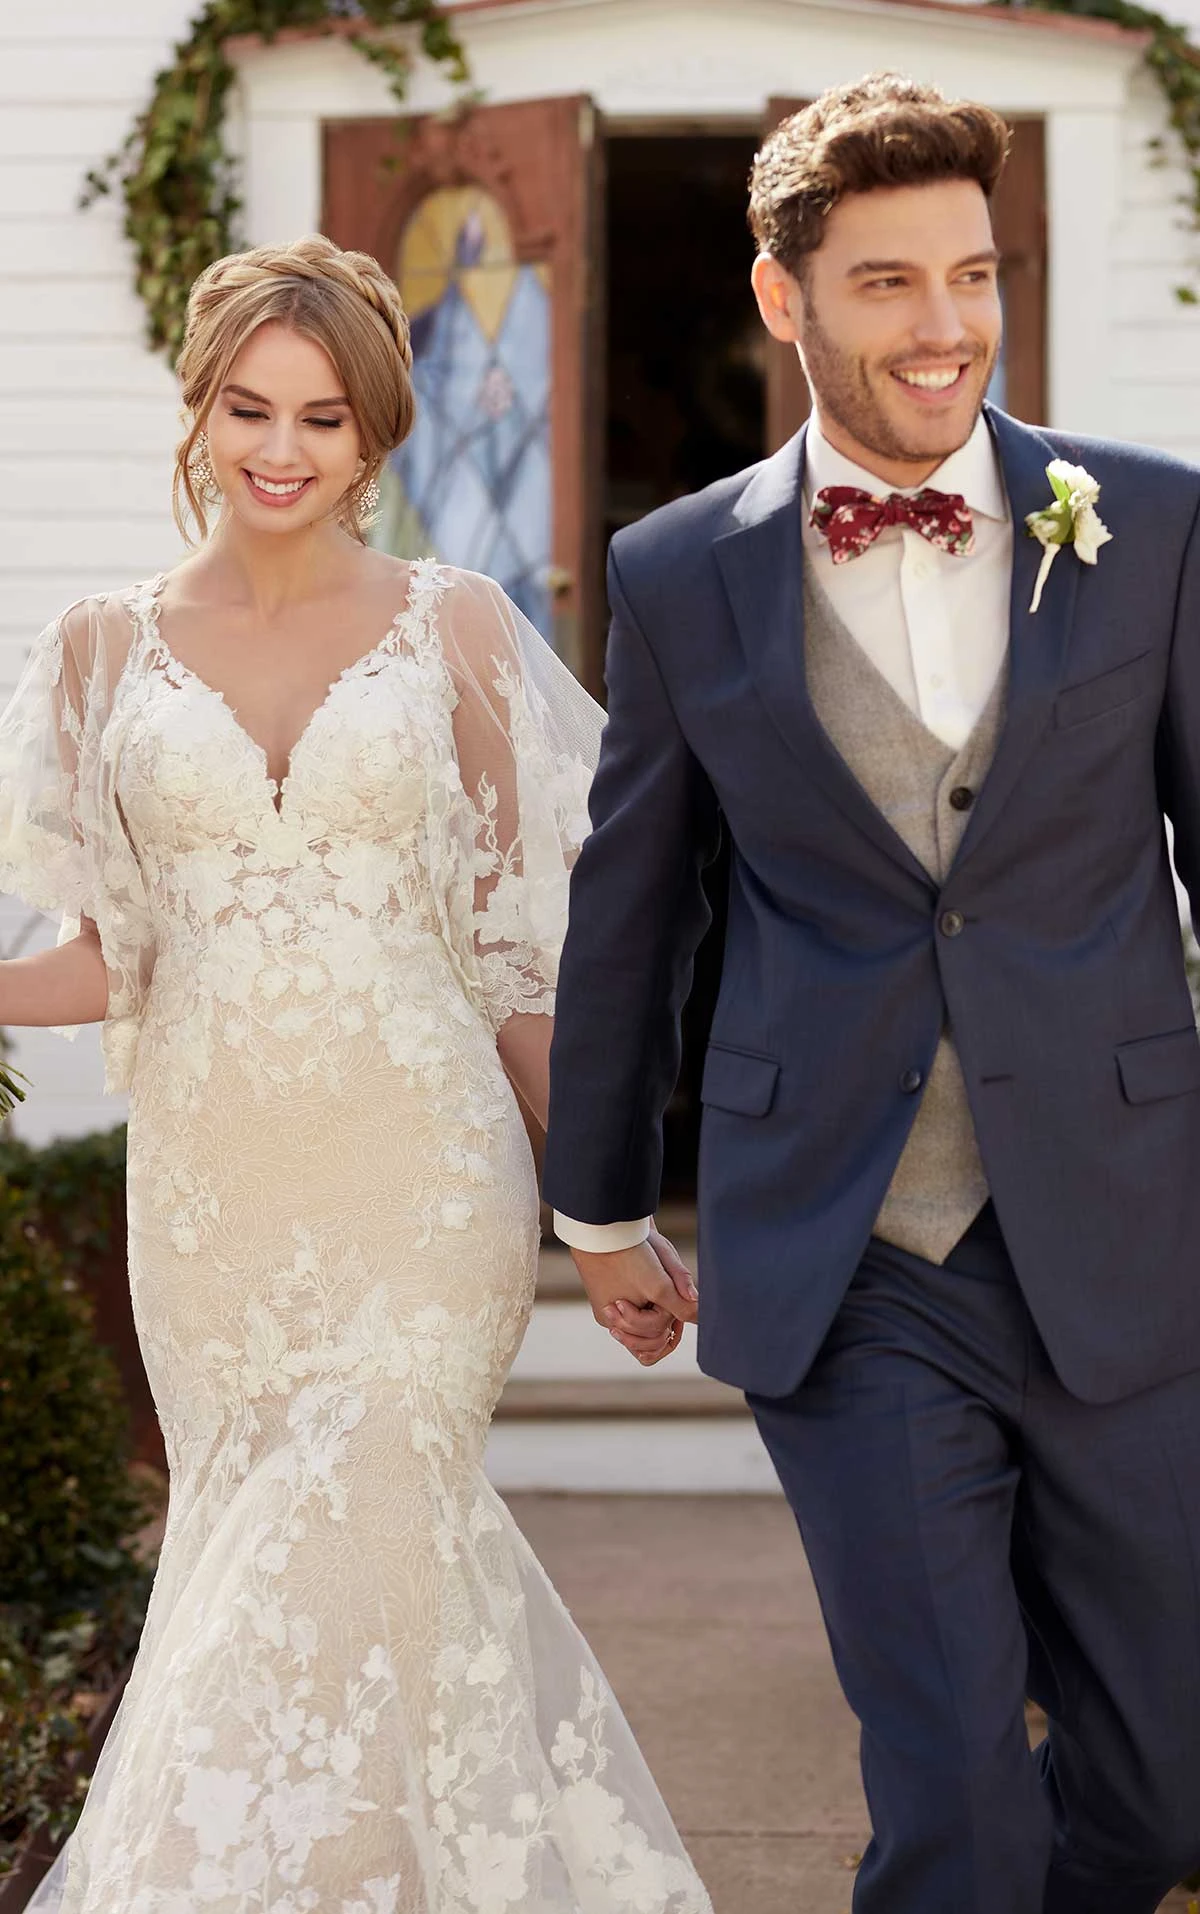 wedding dress with removable sleeves